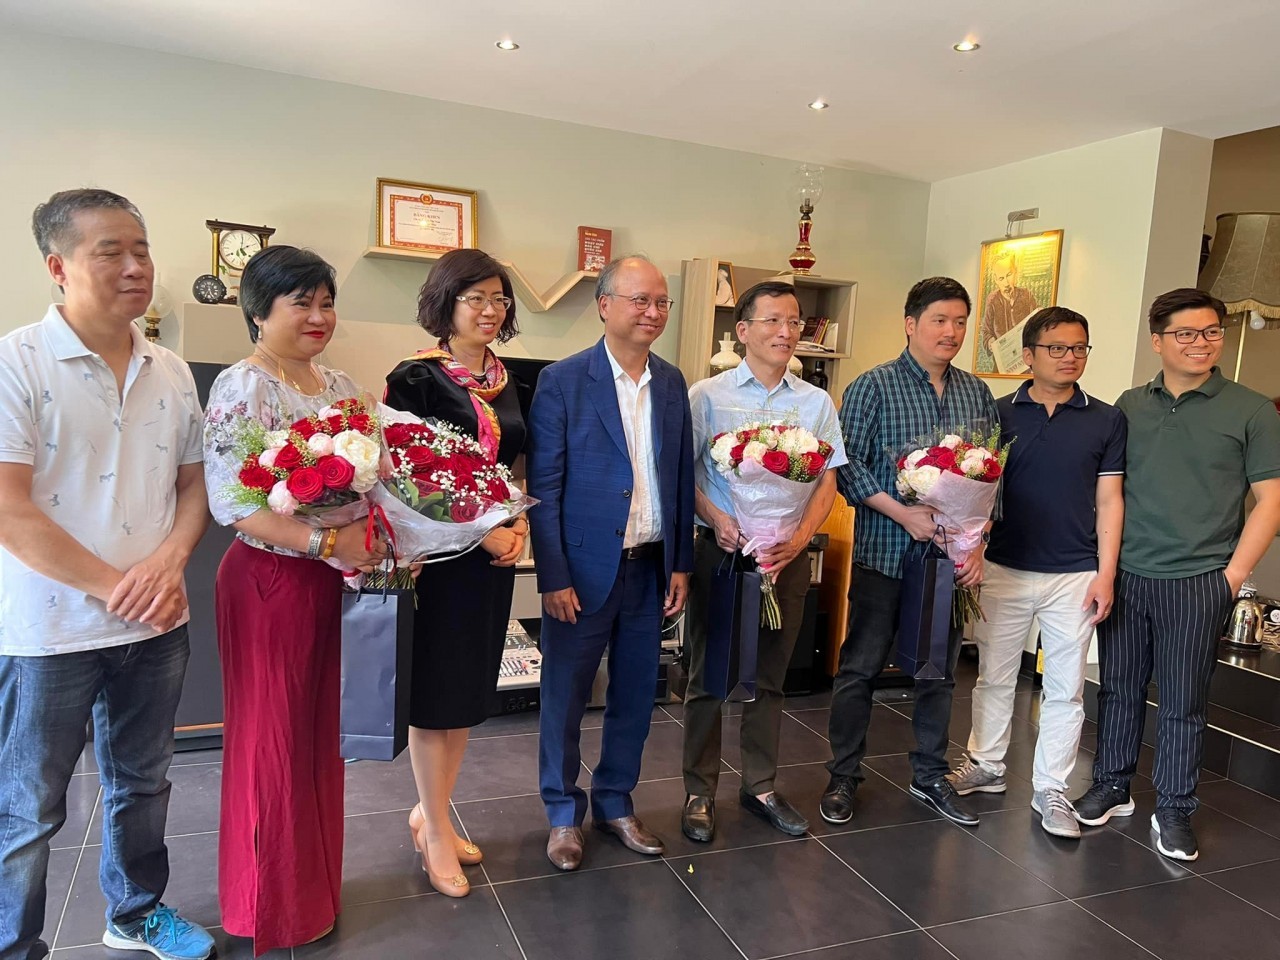 Vietnamese Ambassador to France Dinh Toan Thang and Ambassador - Head of the Permanent Delegation of Vietnam to UNESCO Le Thi Hong Van (3rd and 4th from left) congratulate the Vietnamese resident reporters in France. Photo: Embassy of Vietnam in France